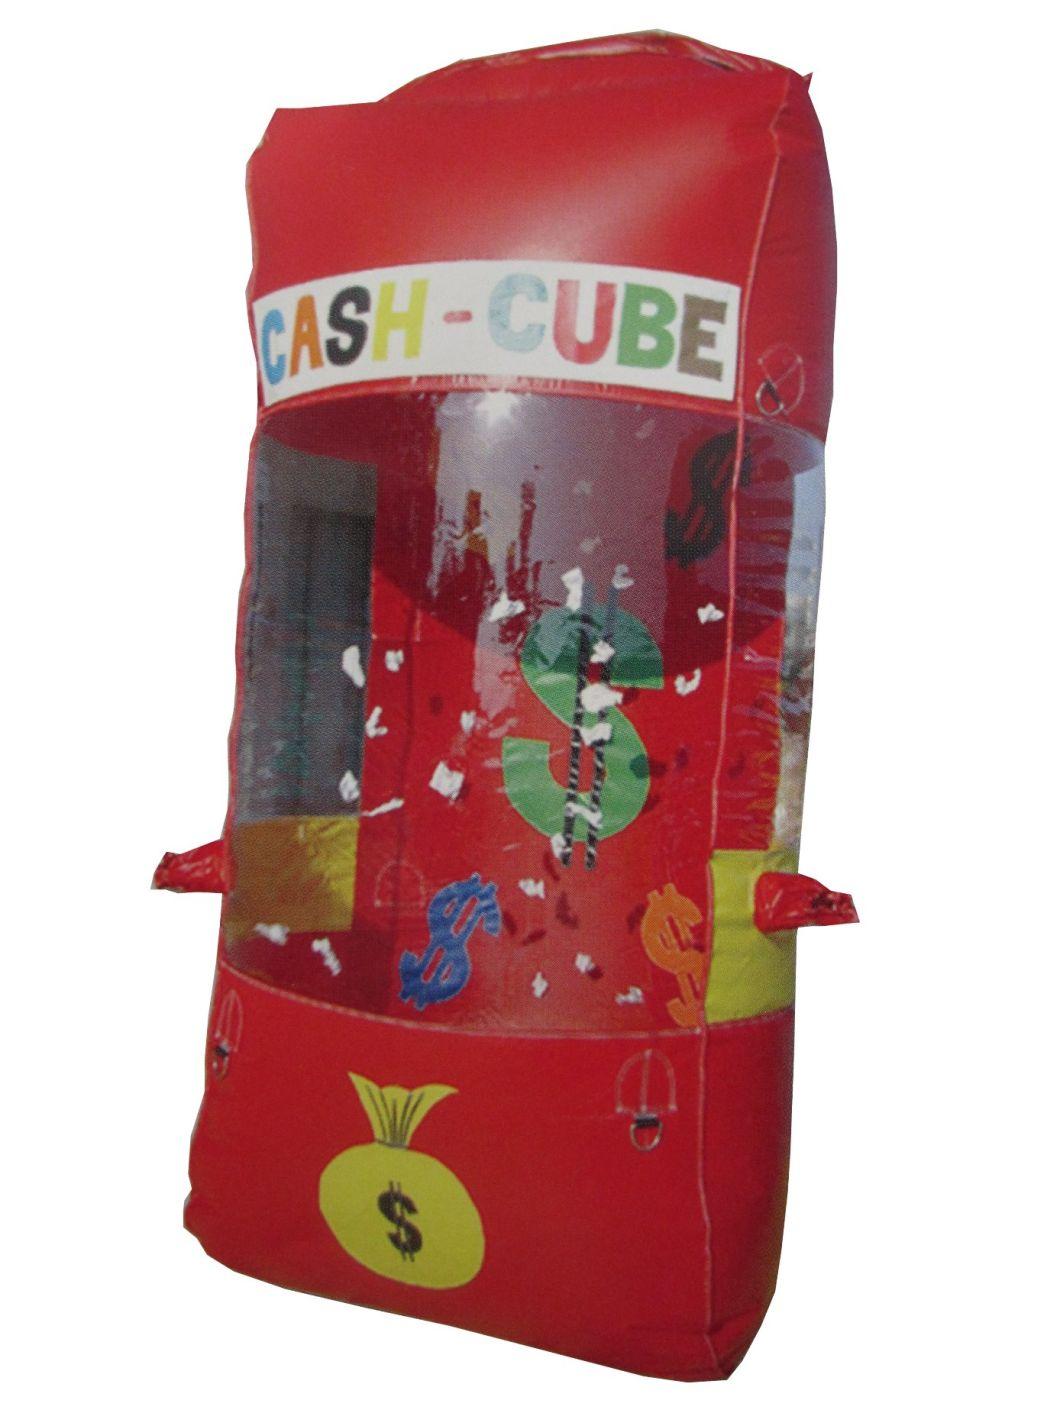 Inflatable Money Booth, Inflatable Cash Cube for Commercial Use, Advertising Cube Money